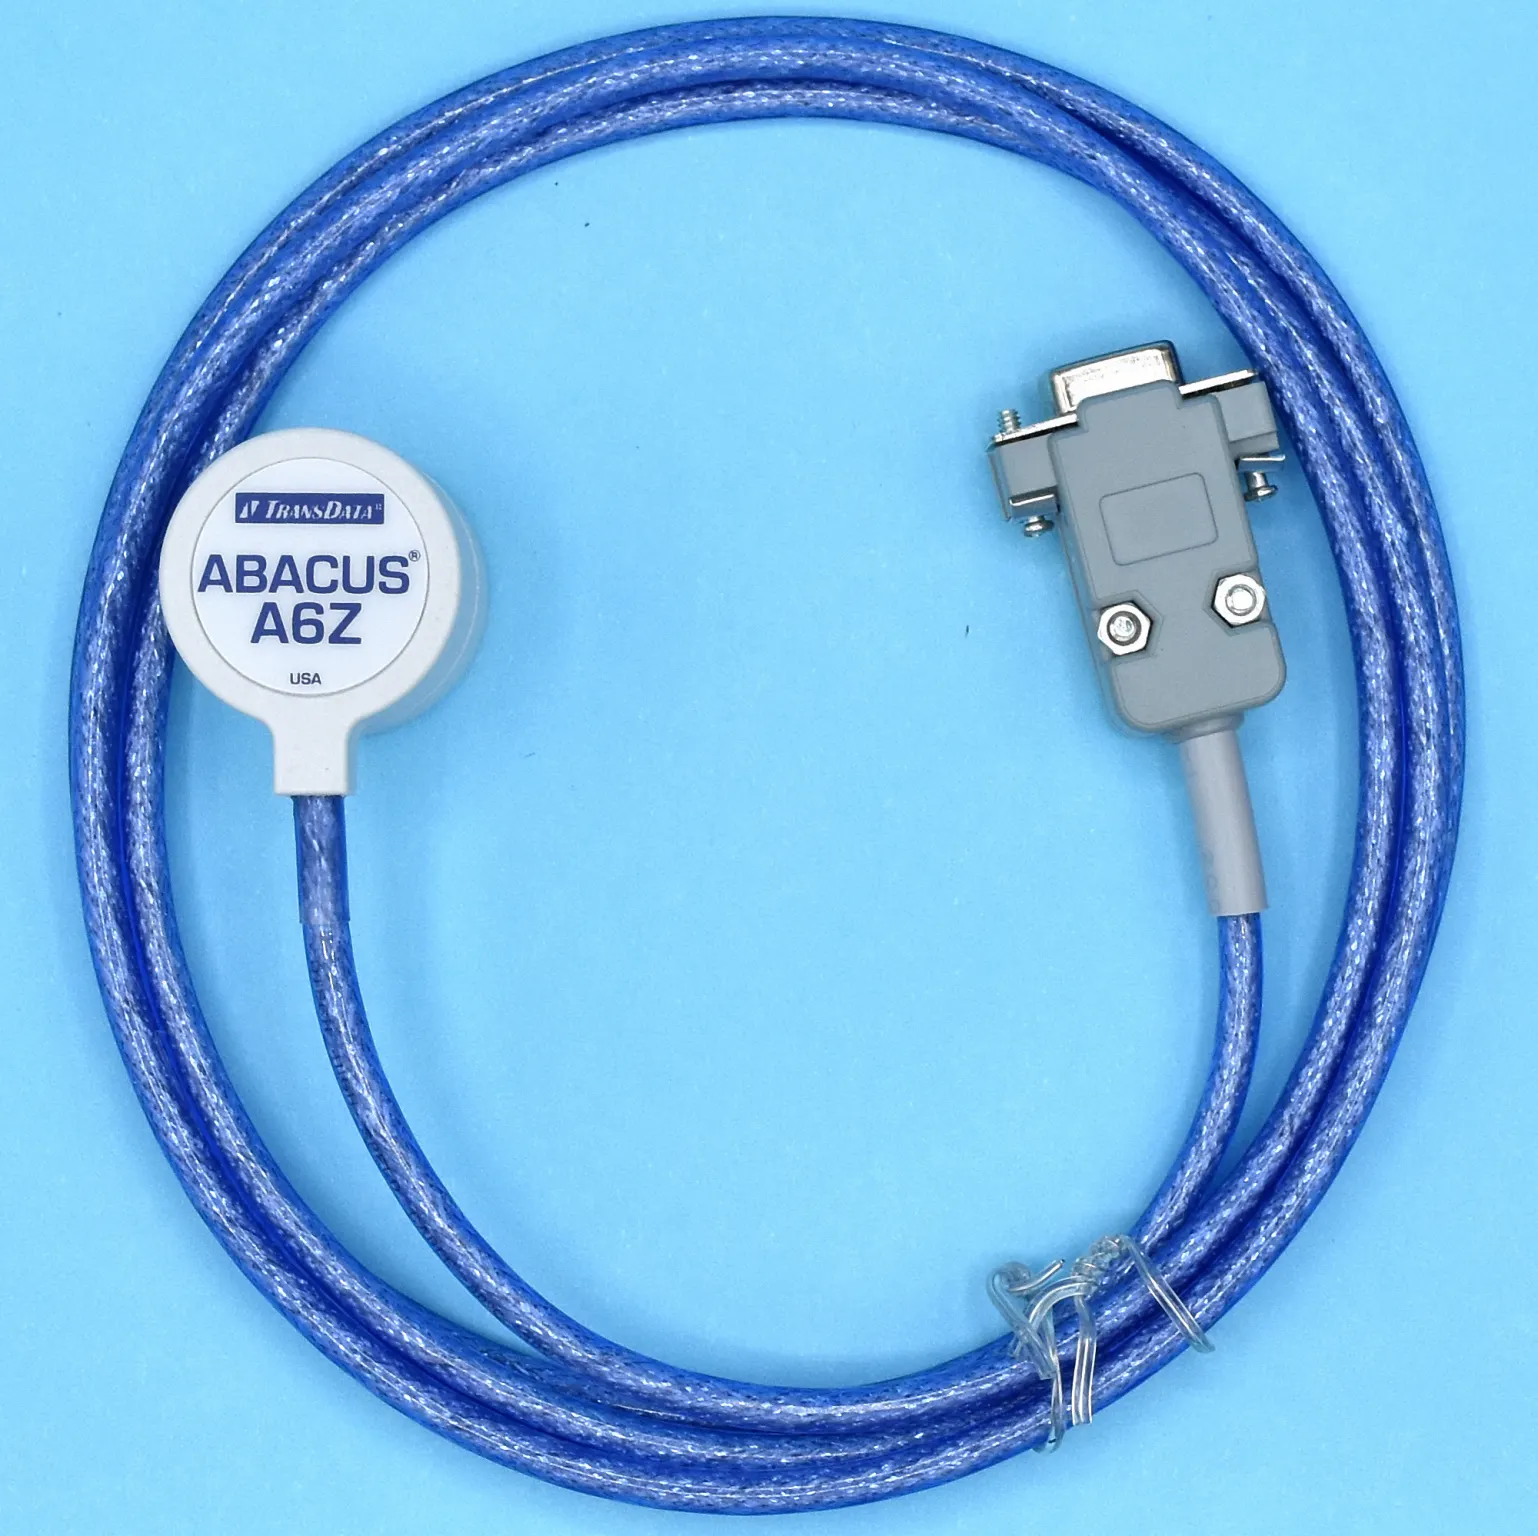 https://transdatainc.com/wp-content/uploads/2022/10/ABACUS-A6Z-P-D09F-2A-ANSI-NORTH-AMERICAN-METERS-9-Pin-SERIAL-OPTICAL-PROBE-44A0039-1.webp